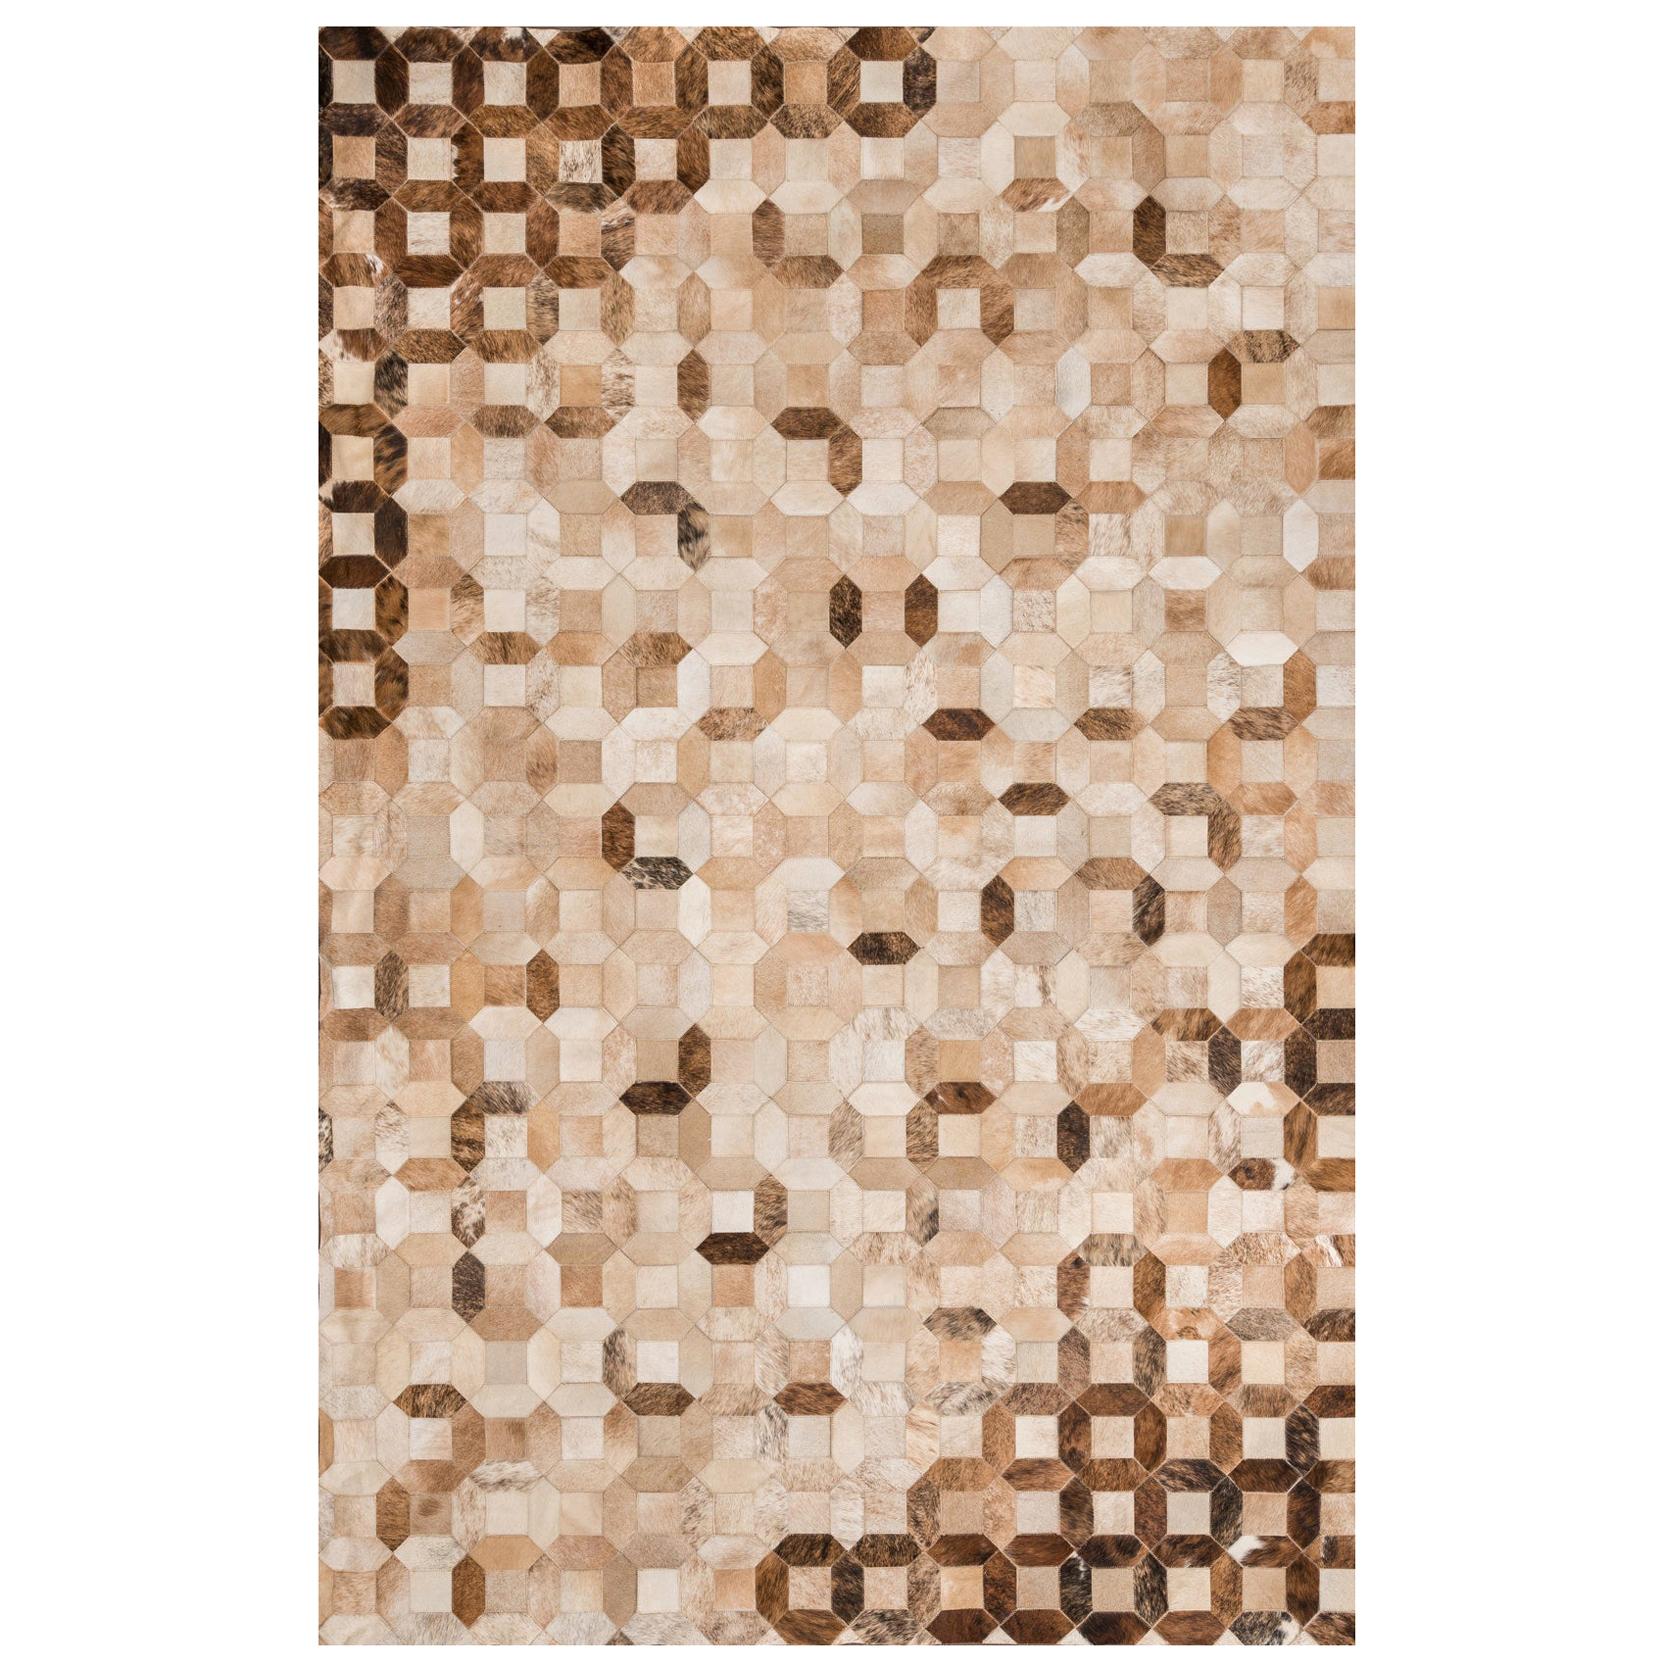 Natural Caramel Color Graphic Patterned Cowhide Area Floor Rug Small For Sale